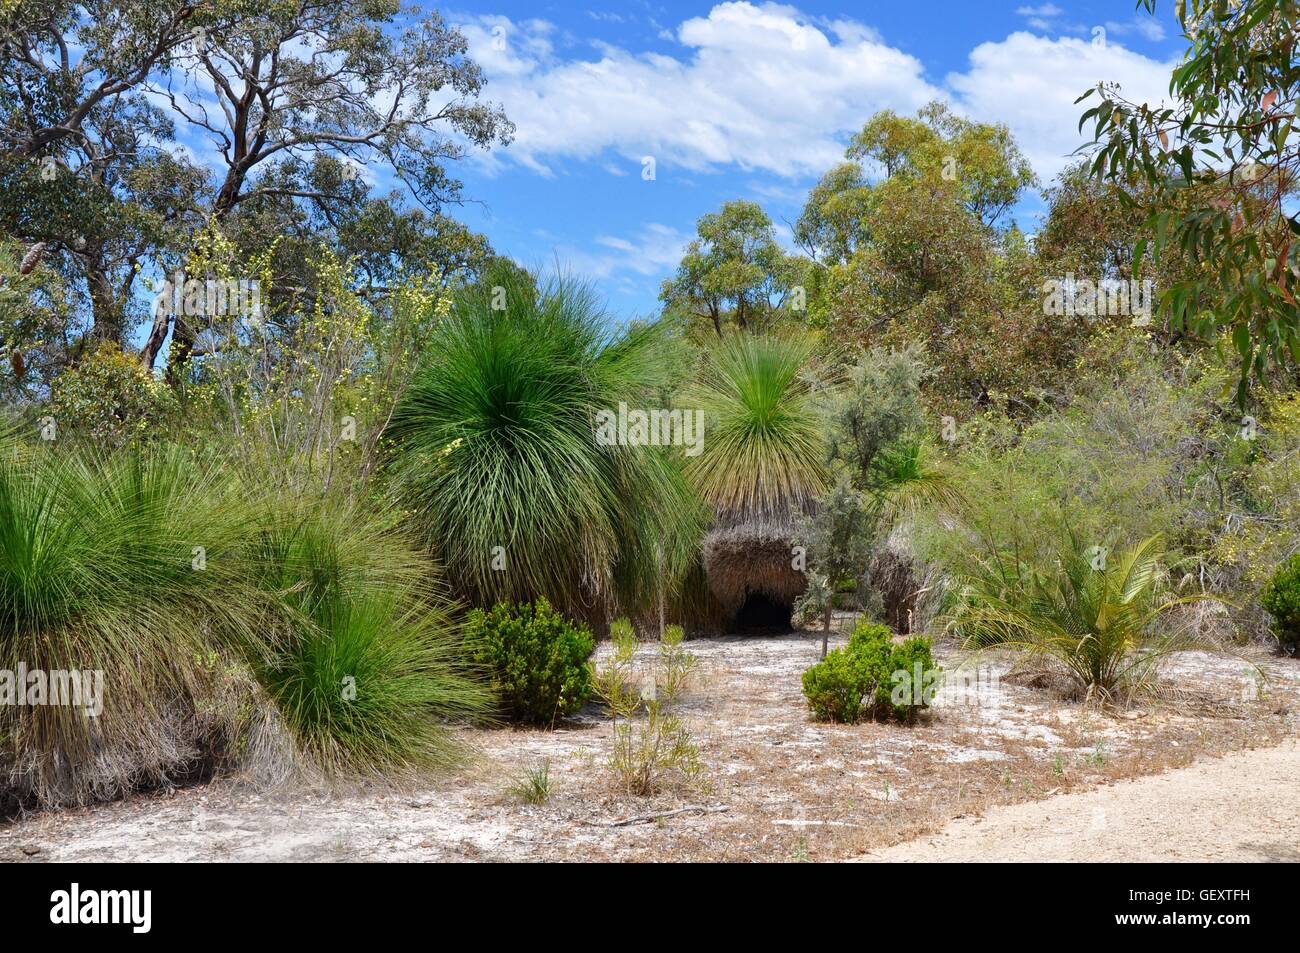 Spiky, green needles of the unique yakka grass trees with lush greenery in the bushland reserve in Bibra Lake, Western Australia Stock Photo